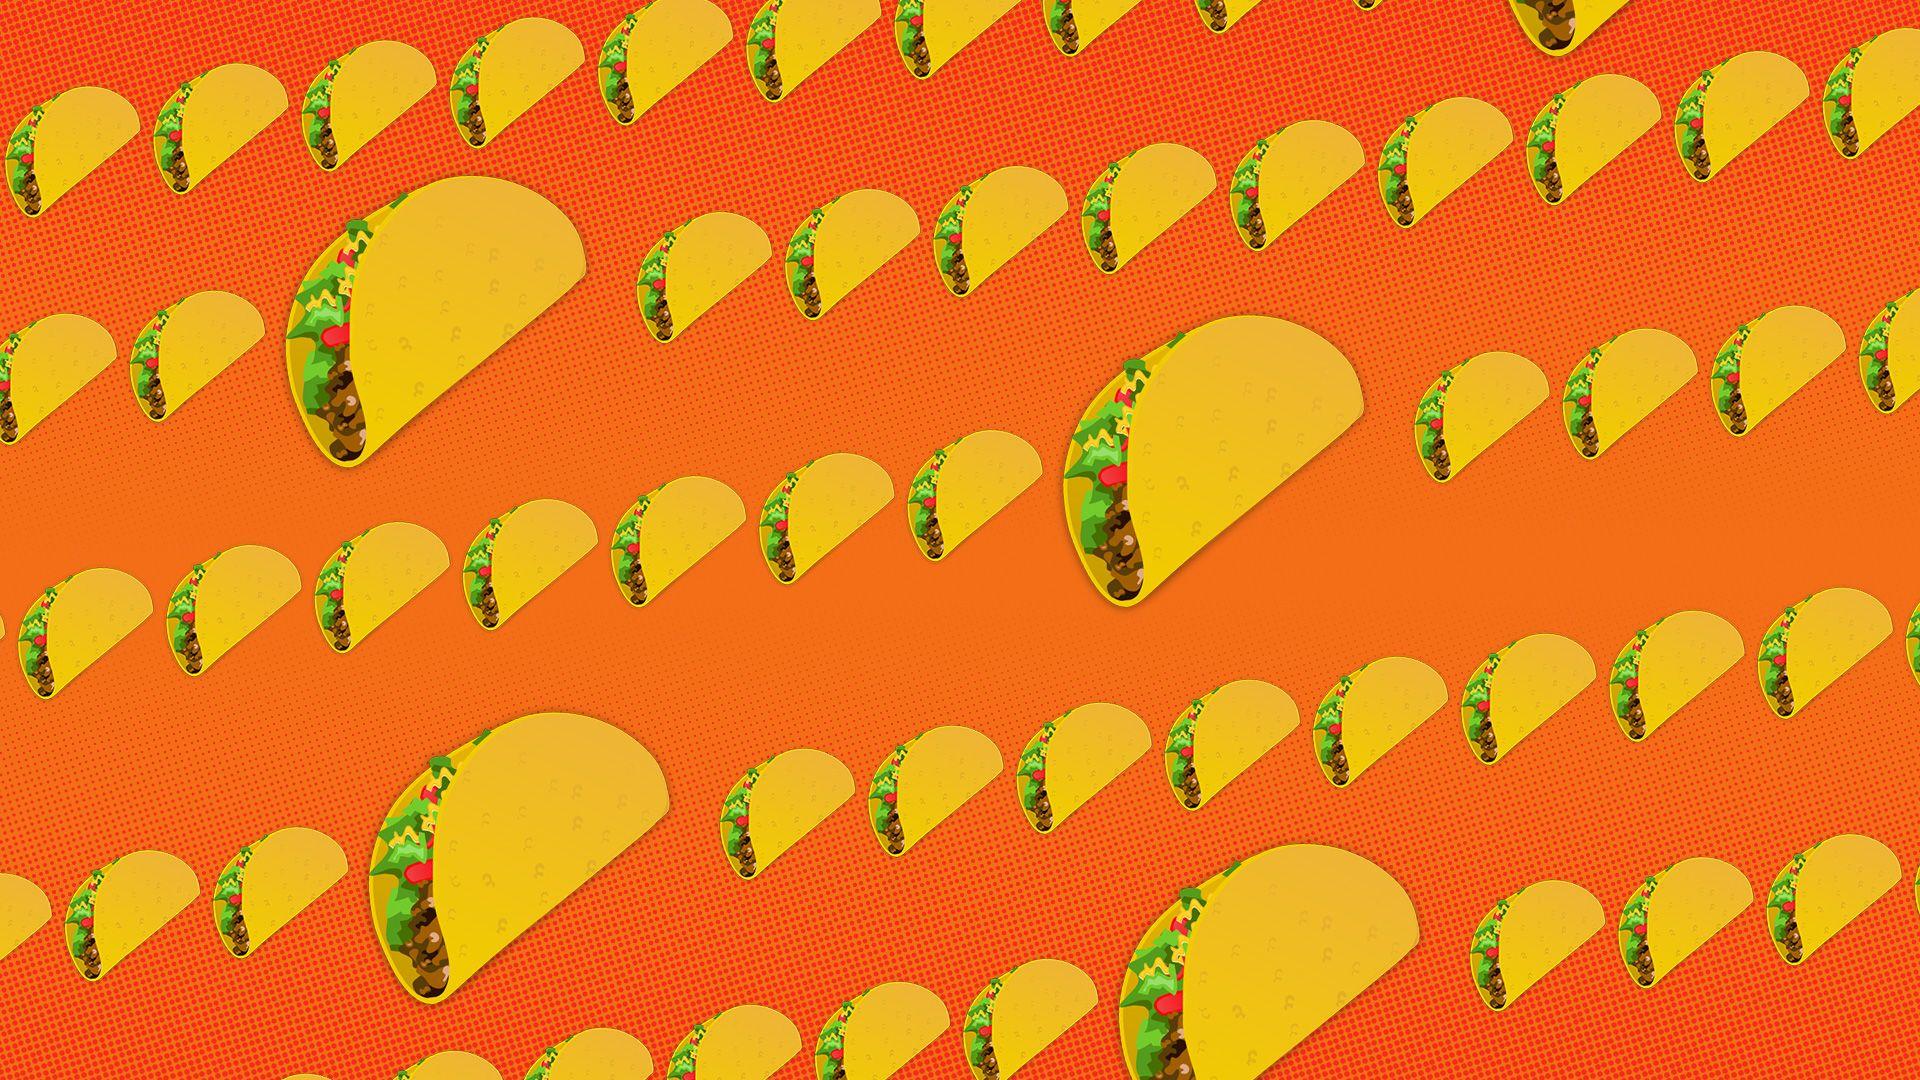 Taco Bell Wallpaper, PC Taco Bell Wallpaper Most Beautiful Image